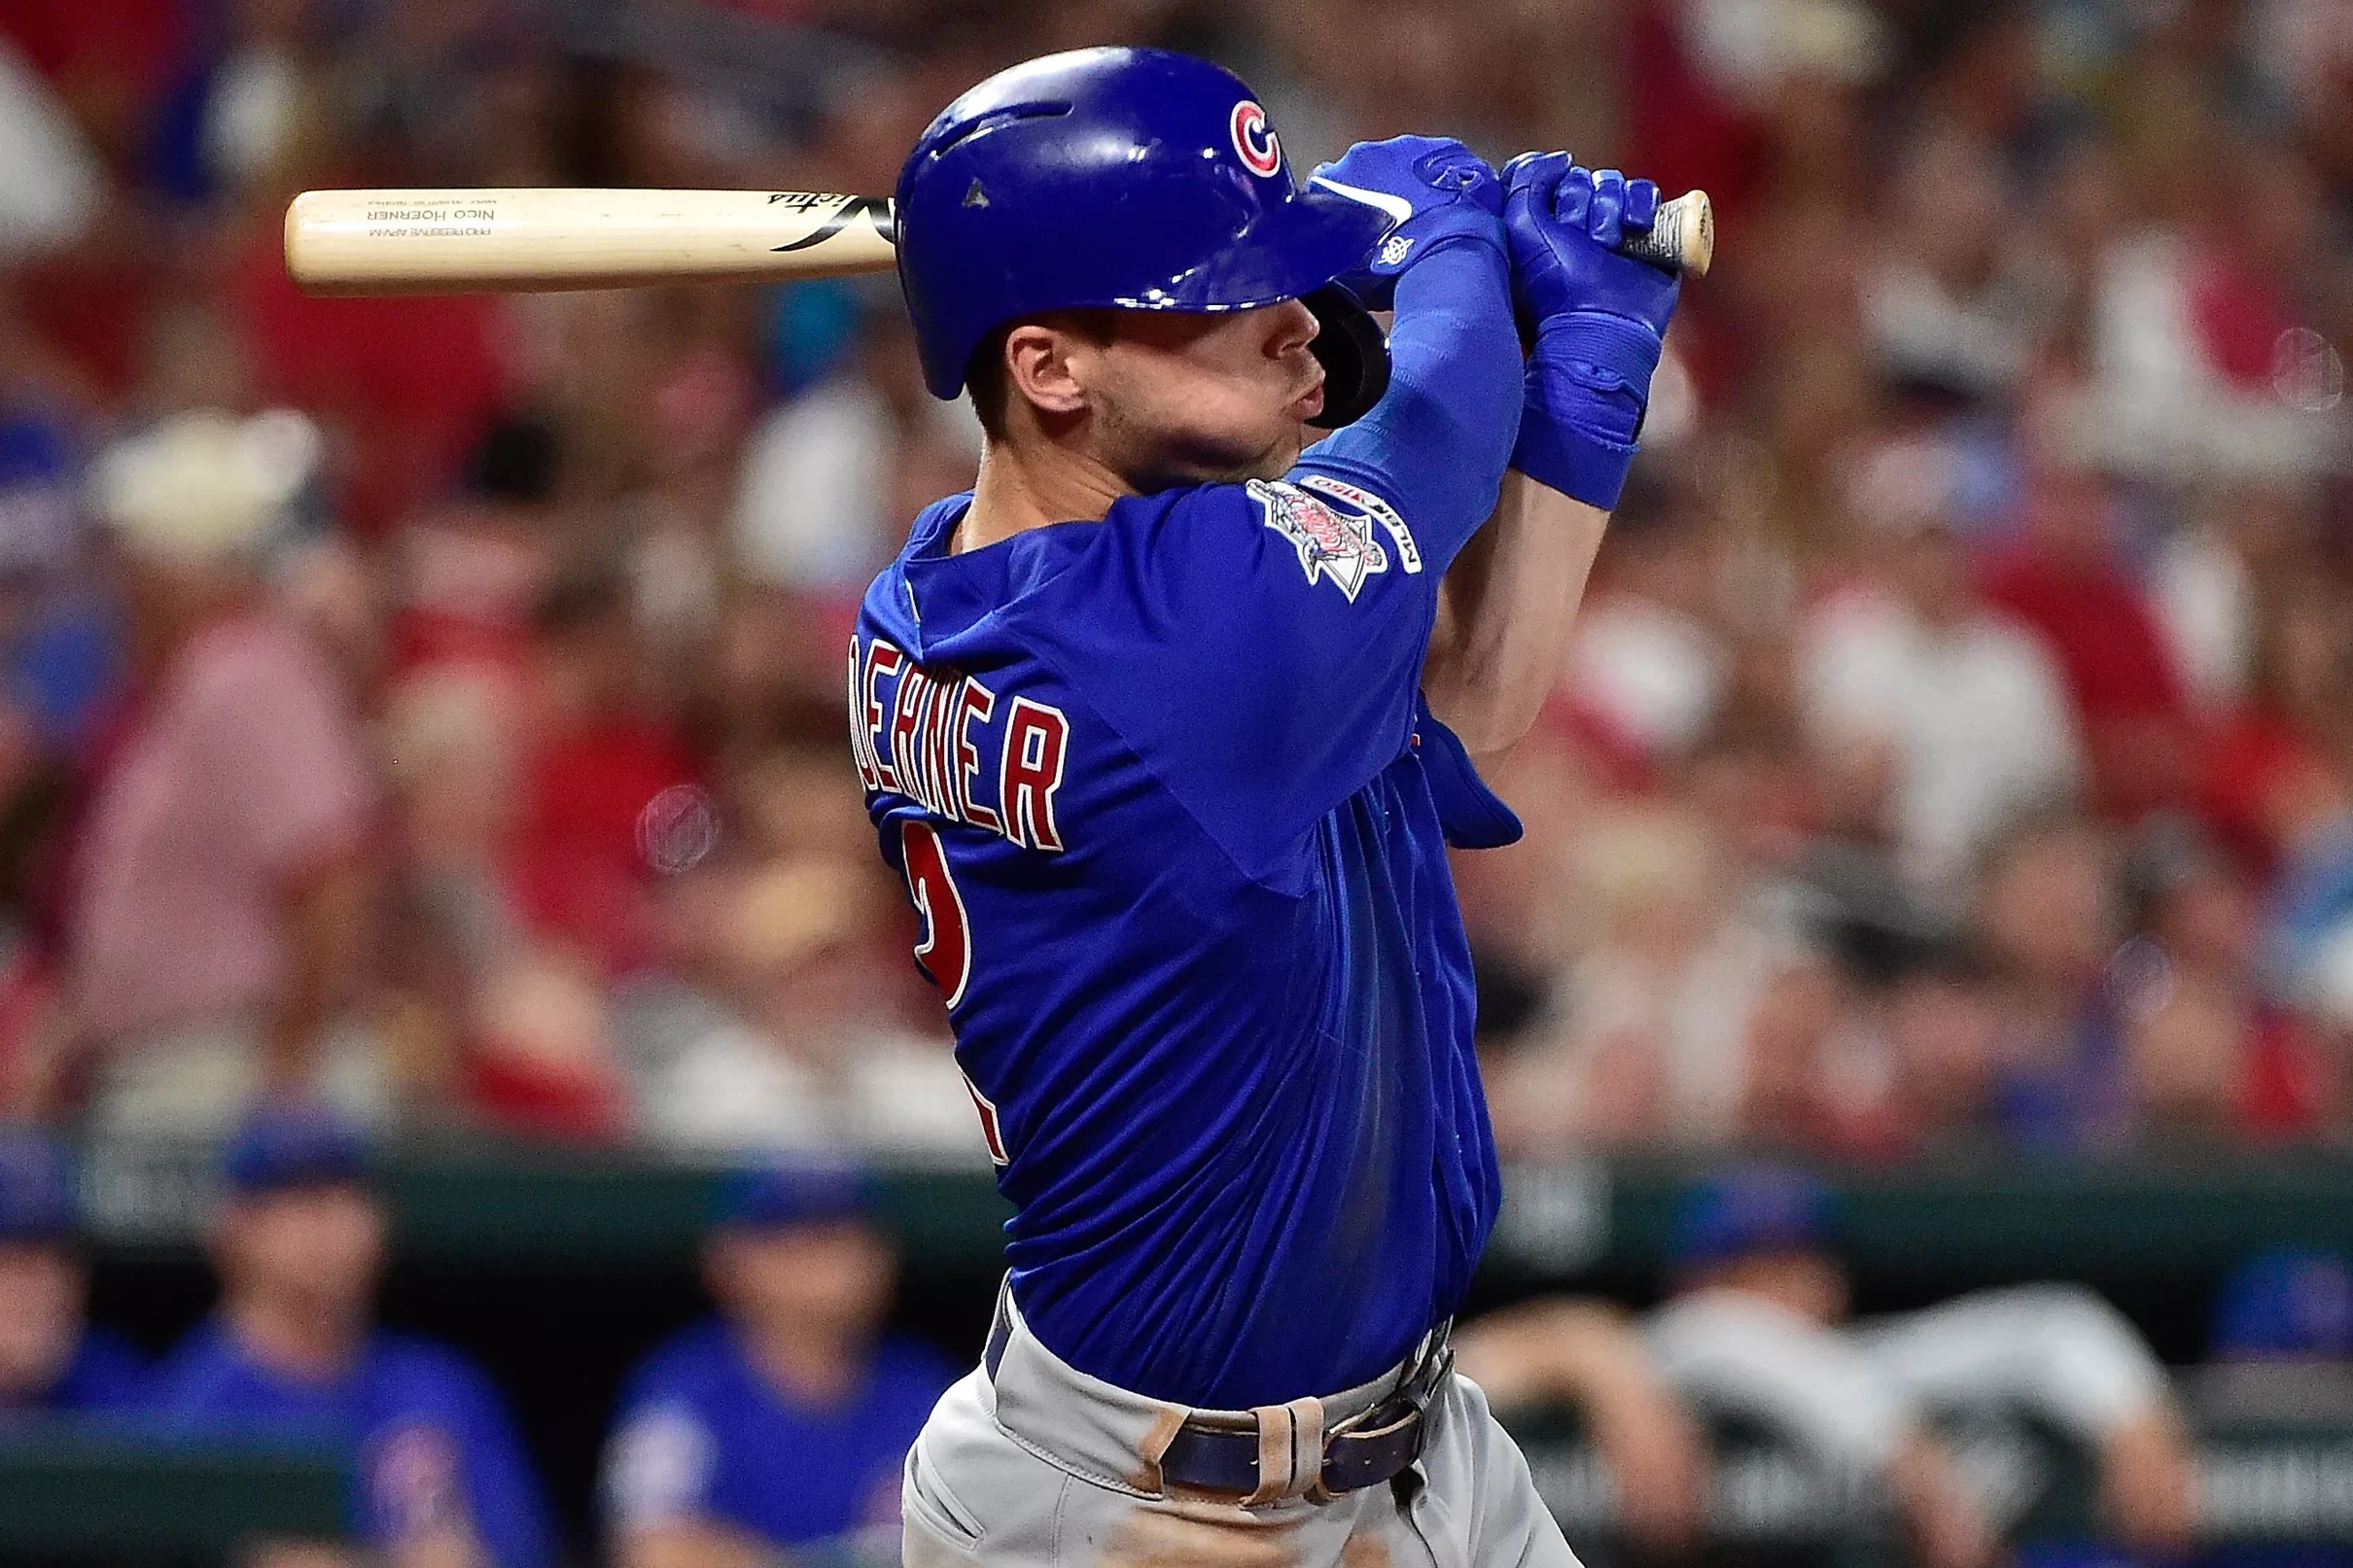 Several Cubs prospects on Baseball America Top 20 League Prospects lists